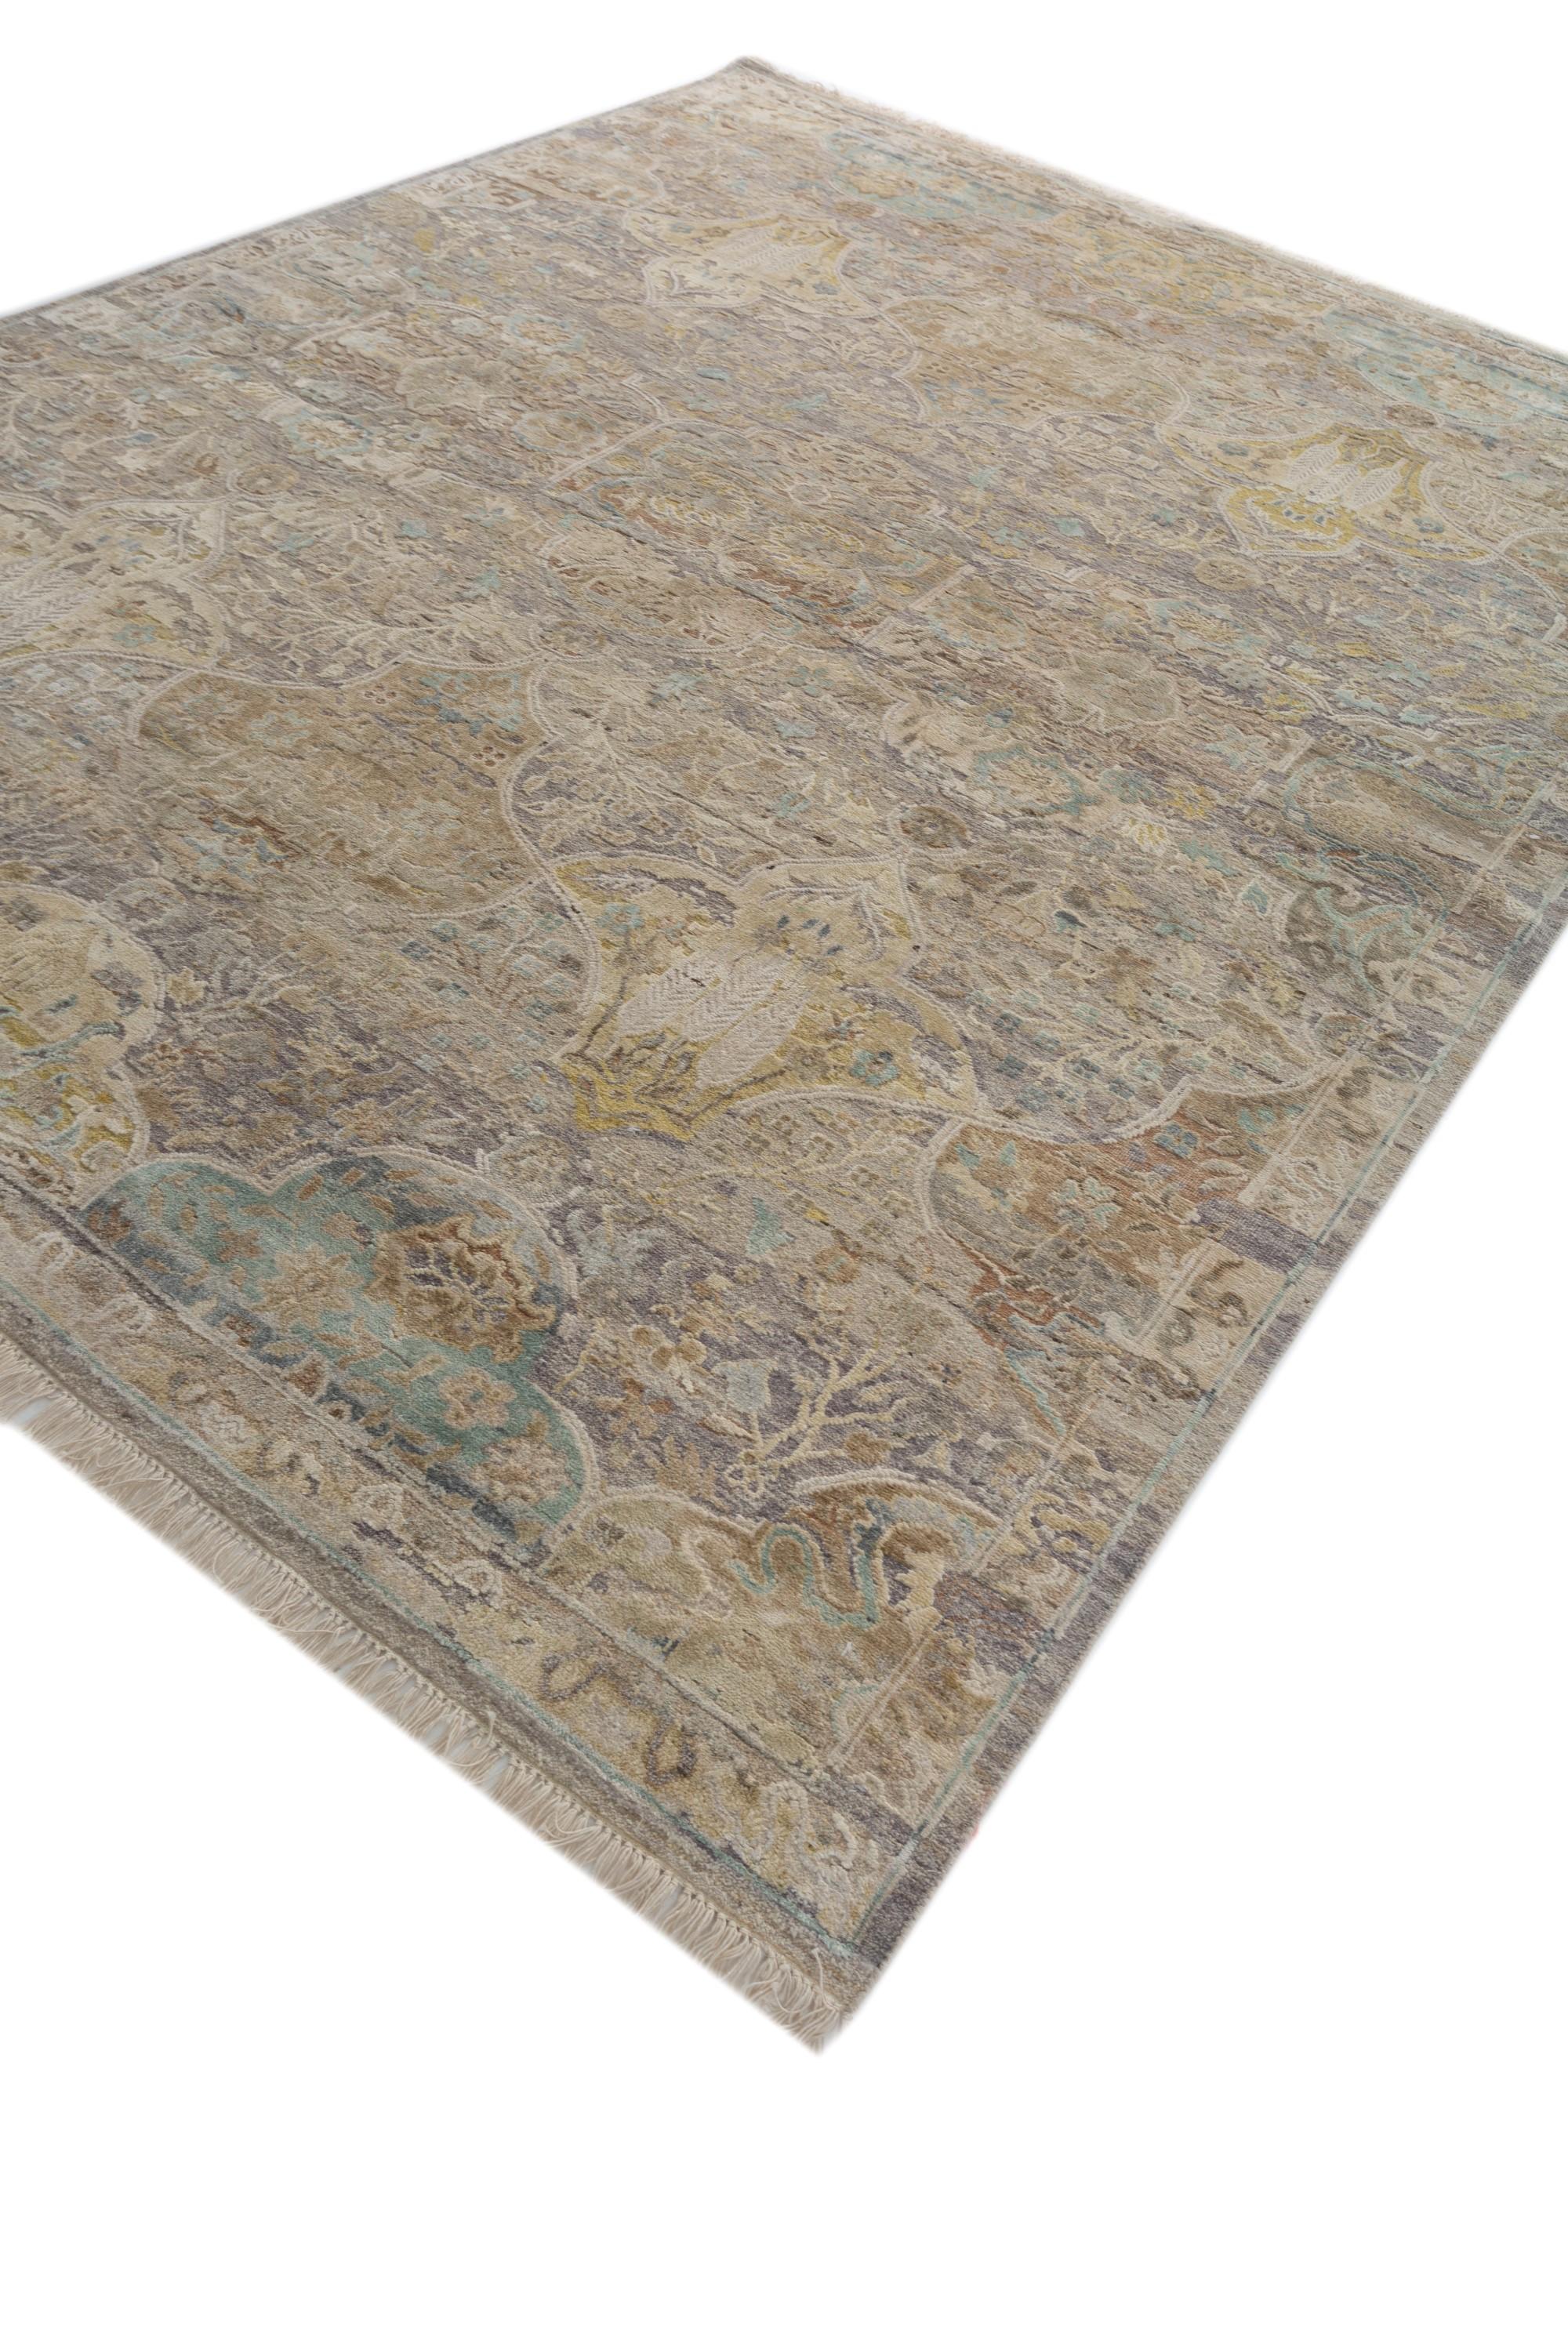 Tibetan Timeless Medium Taupe Dark Ivory 180X270 Cm Hand-Knotted Rug For Sale